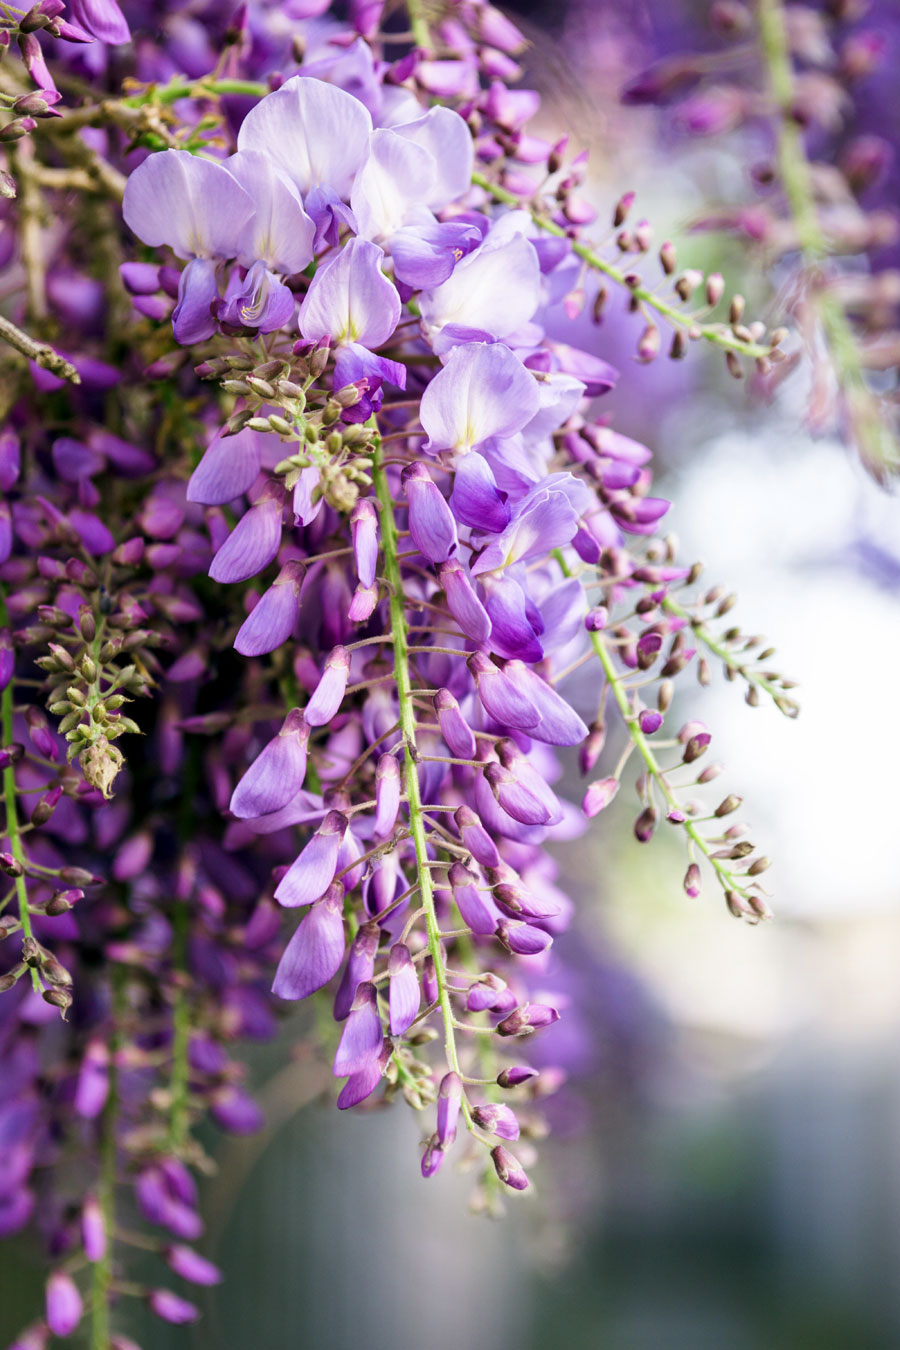 When and How to Grow Wisteria Plants | Growing Wisteria vine